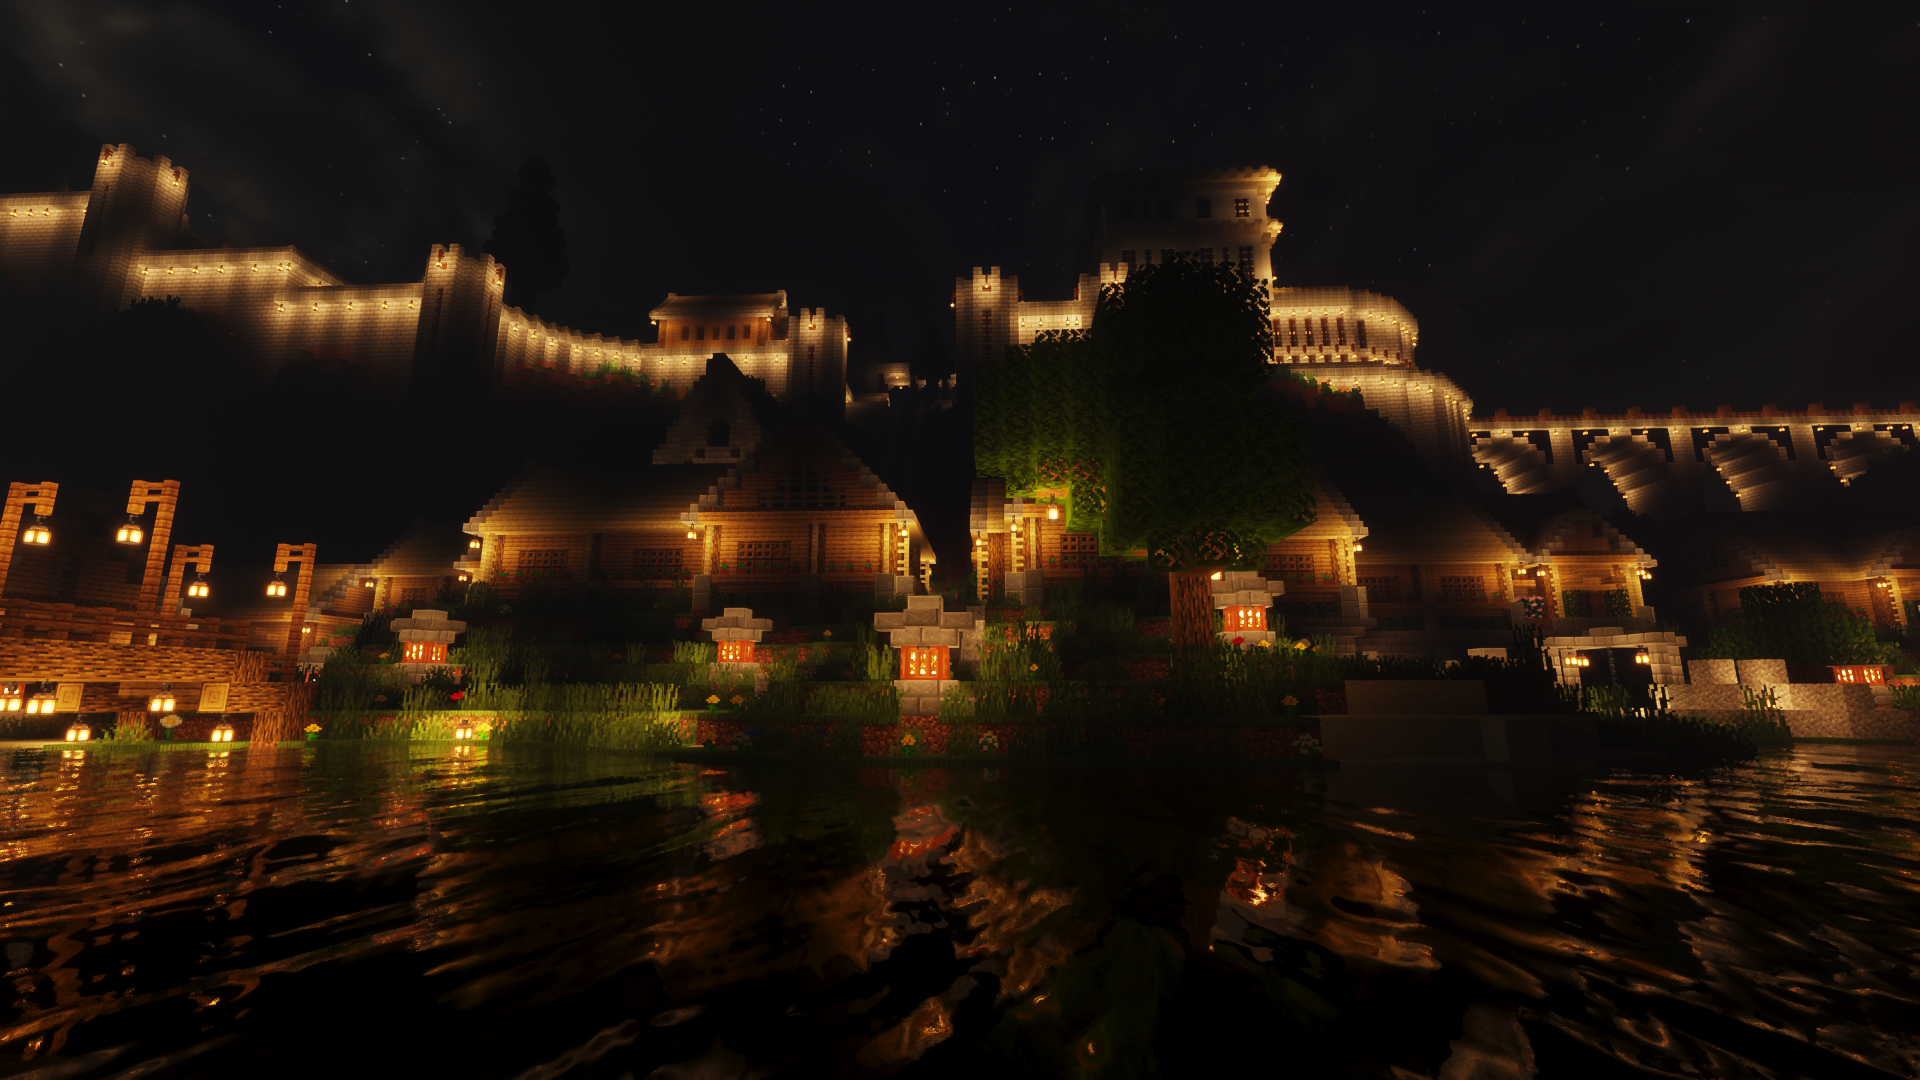 General 1920x1080 Minecraft building video games shaders night city lights CGI castle water